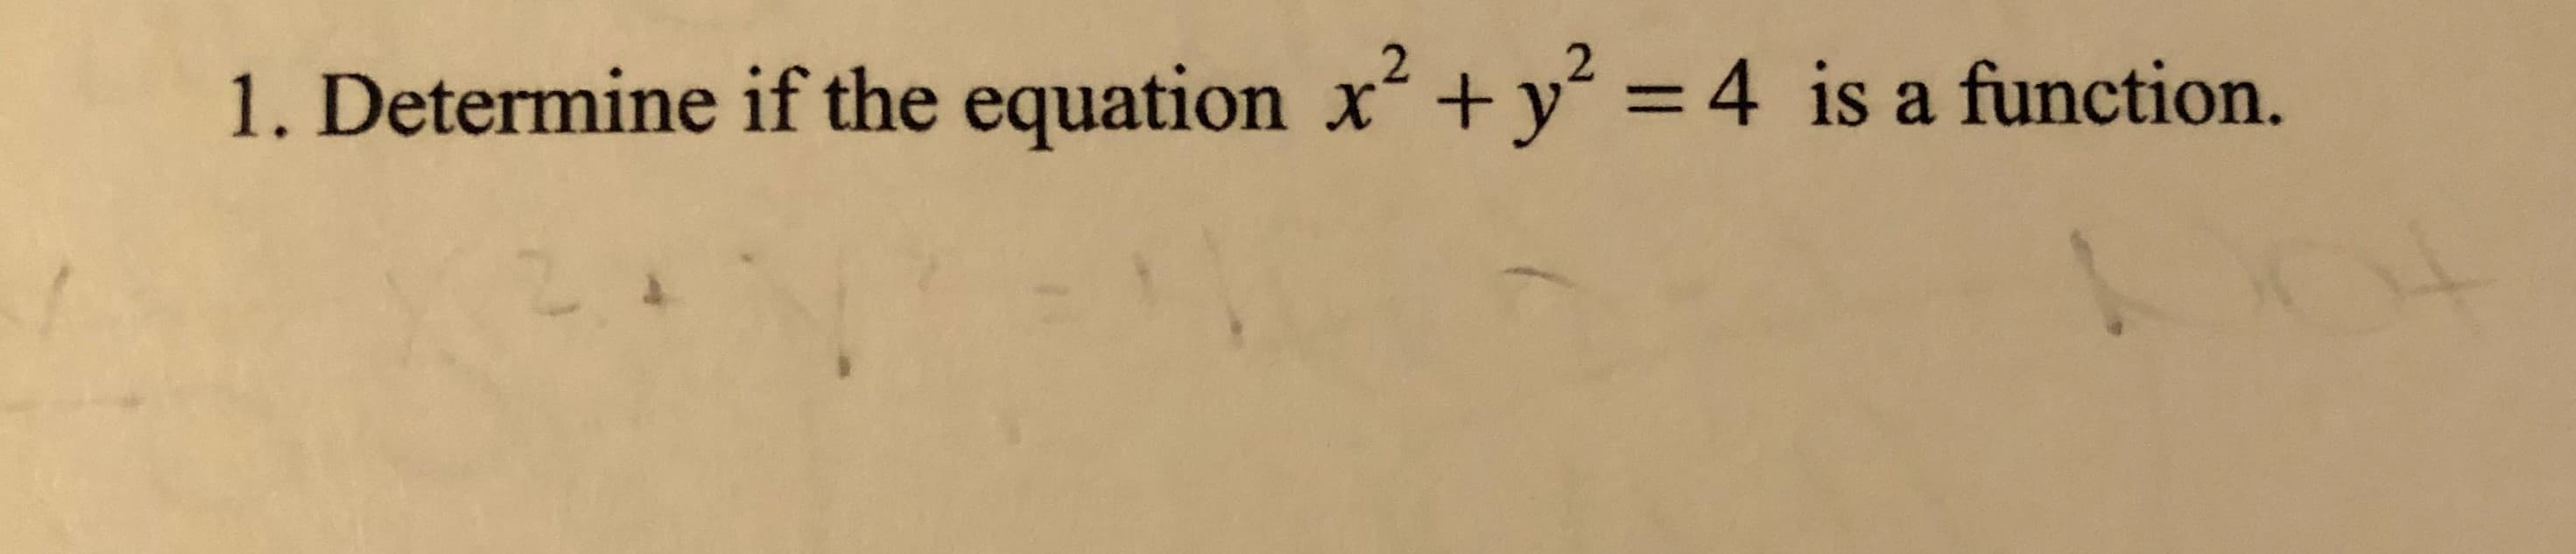 1. Determine if the equation x? +y° = 4 is a function.
